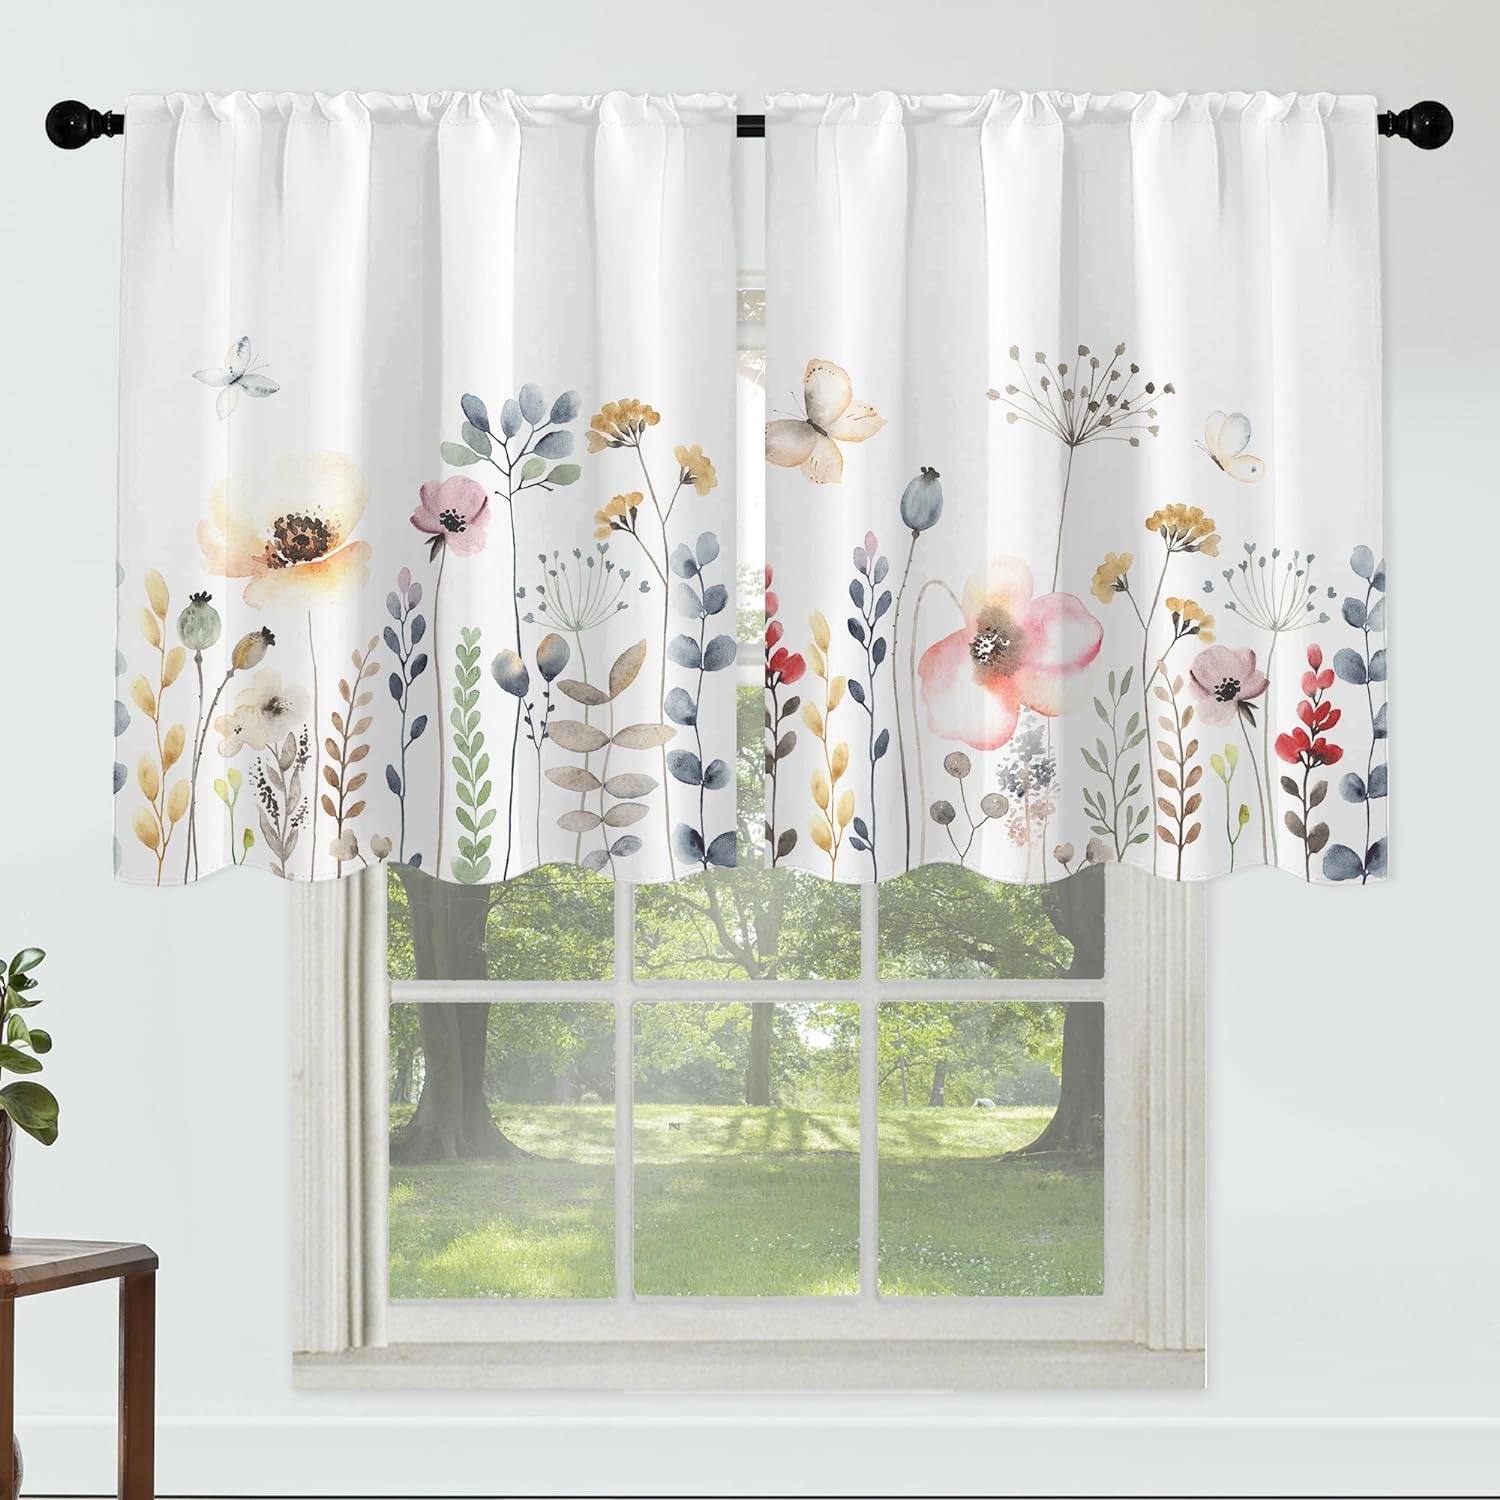 Floral Leaves Curtain for Kitchen Bathroom Watercolour Pink Flower Rod Pocket Window Tier Curtains Valance Set 3 Pcs Plant Printed Curtains 54 X 18 Inches + 27 X 36 Inches *2